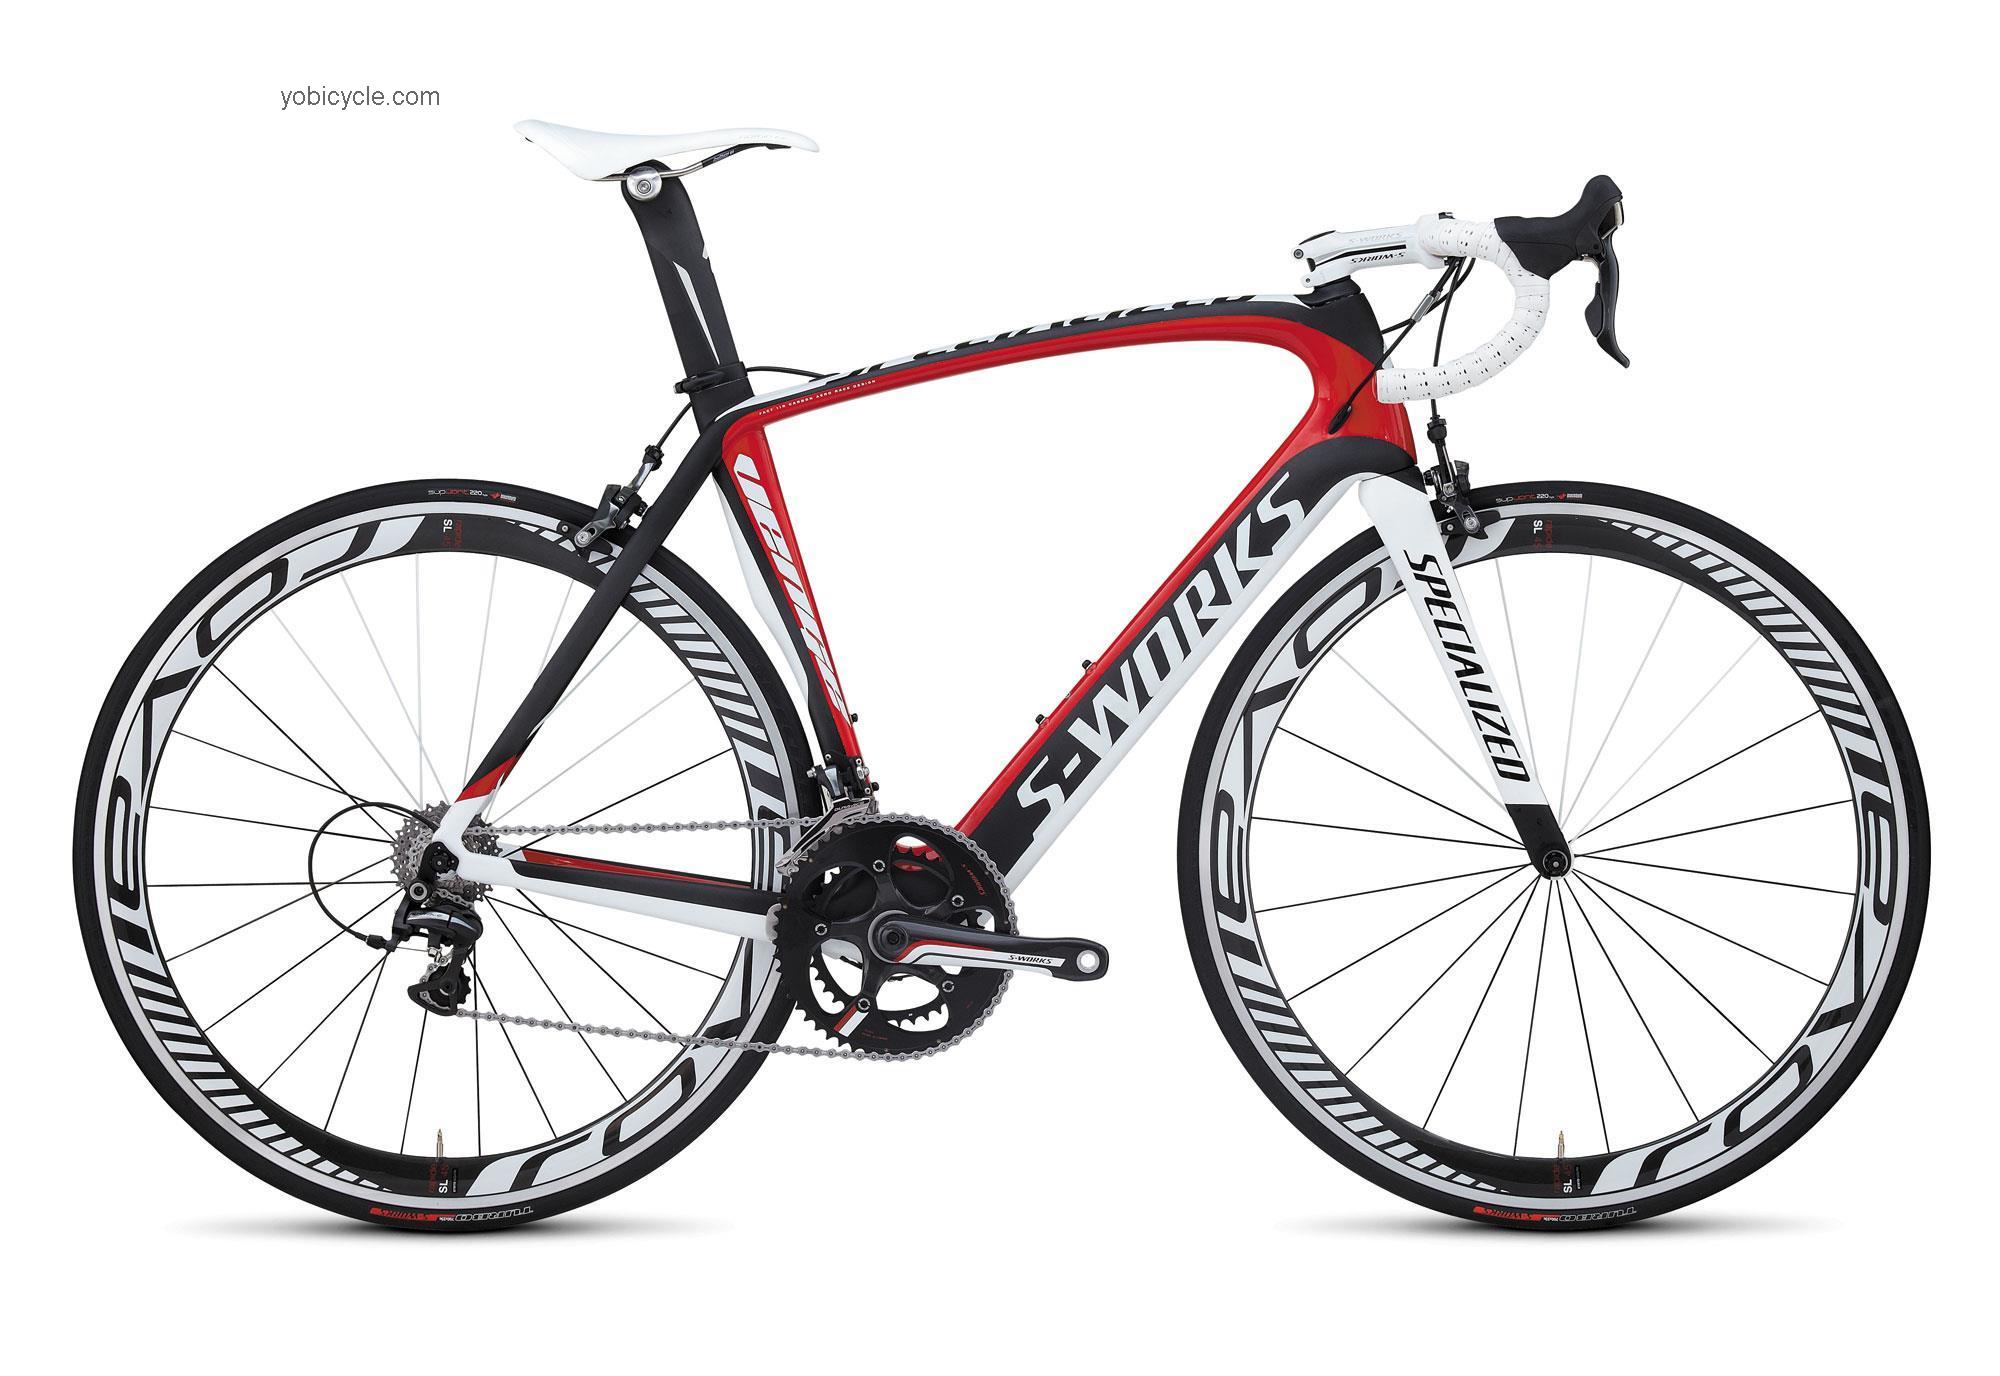 Specialized S-Works Venge Dura-Ace competitors and comparison tool online specs and performance